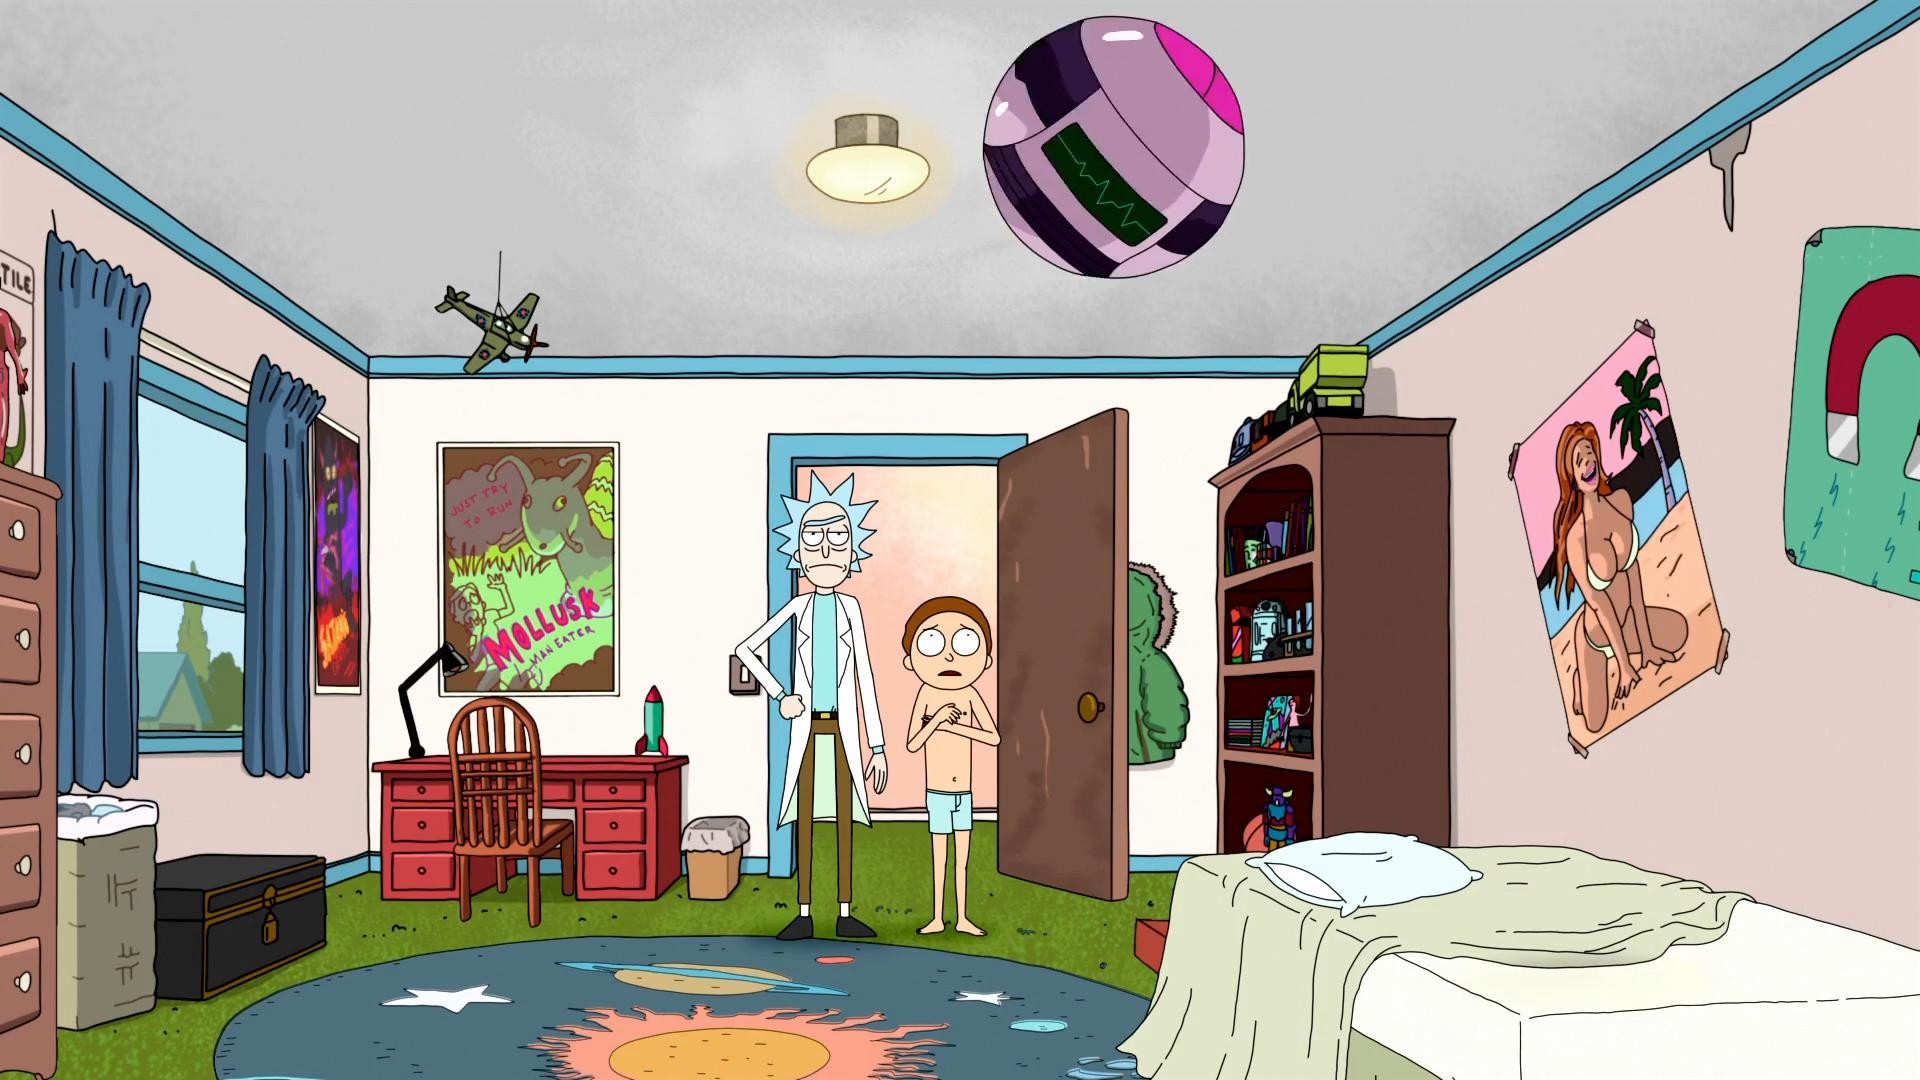 HD New Rick and Morty Backgrounds with image resolution 1920x1080 pixel. You can use this wallpaper as background for your desktop Computer Screensavers, Android or iPhone smartphones